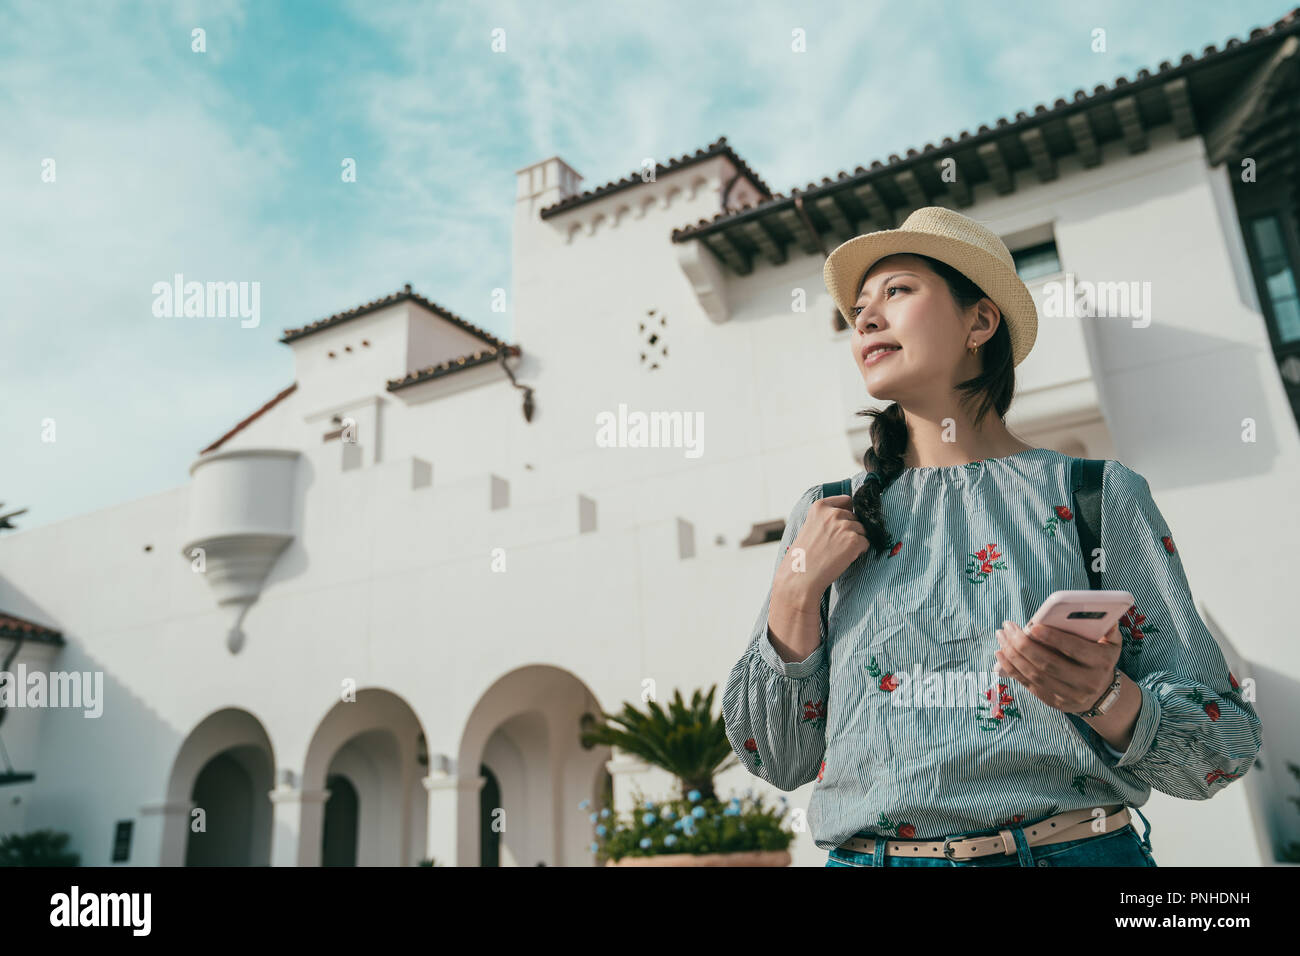 a upward view of a young woman holding a cellphone while visiting a beautiful place in somewhere. Stock Photo